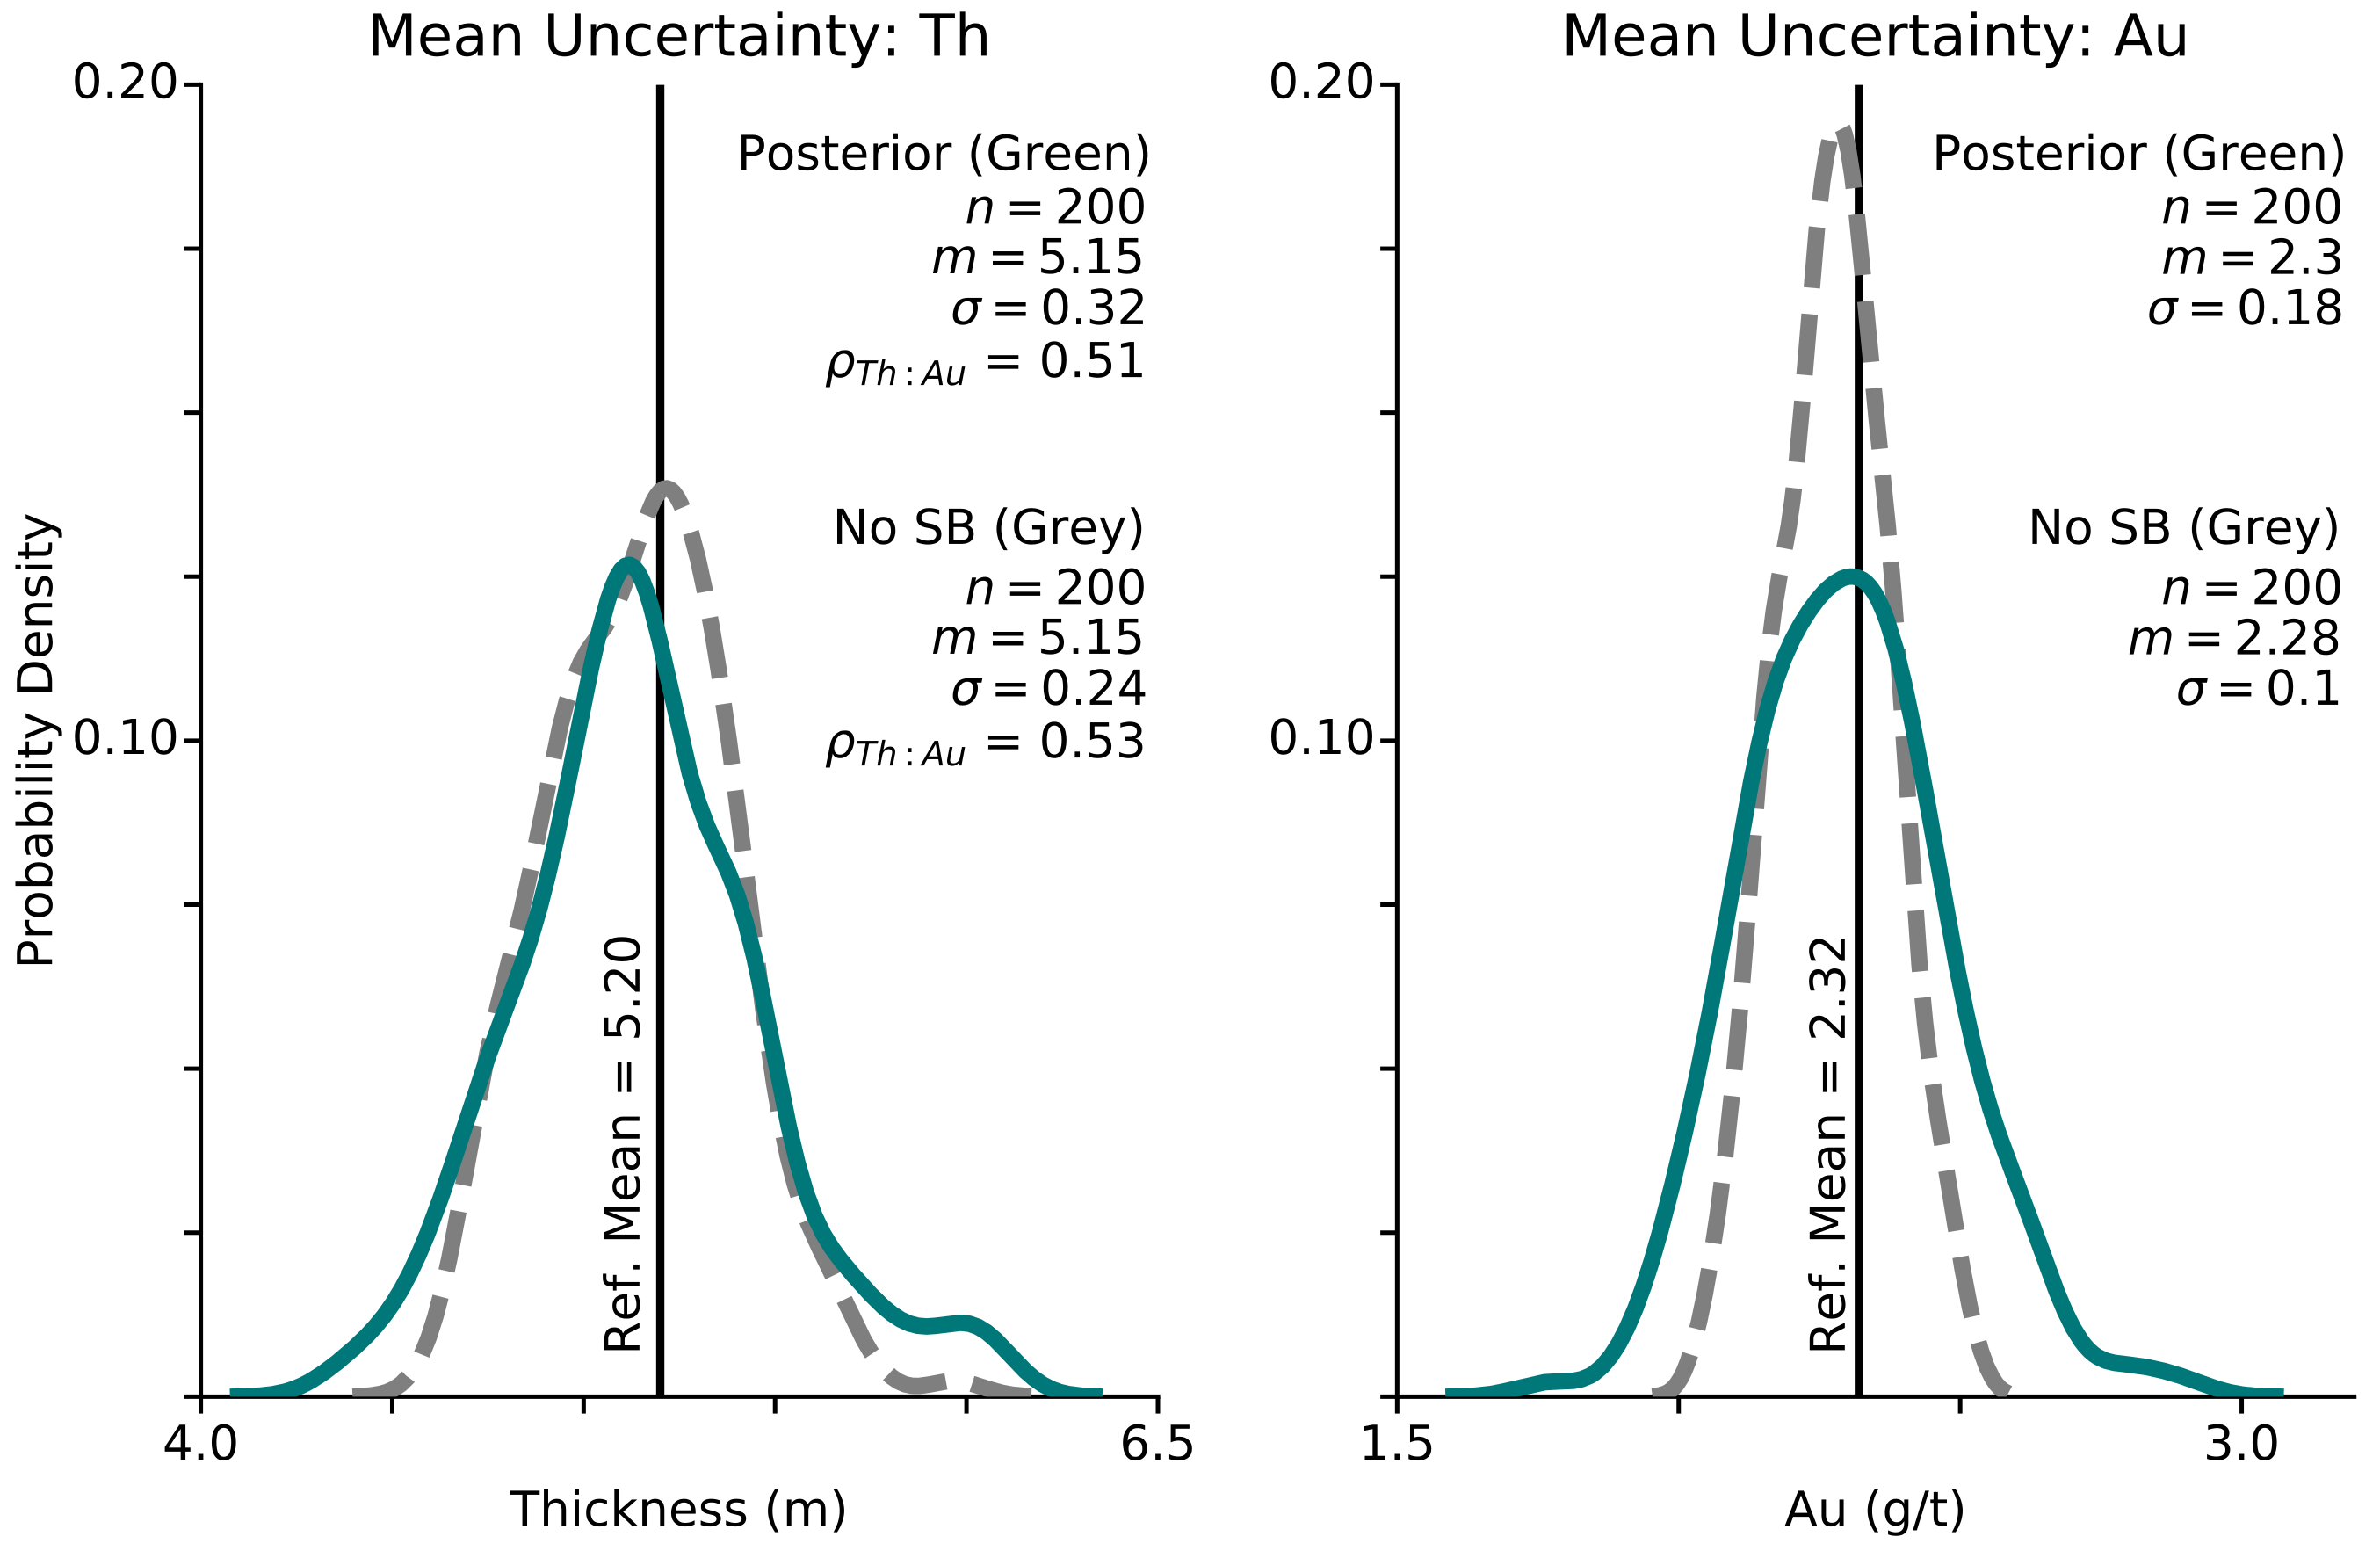 Figure 8: Posterior uncertainty distribution (green line) compared to the simulated uncertainty distribution without the spatial bootstrap (gray dashed line) and the input declustered mean (black line).